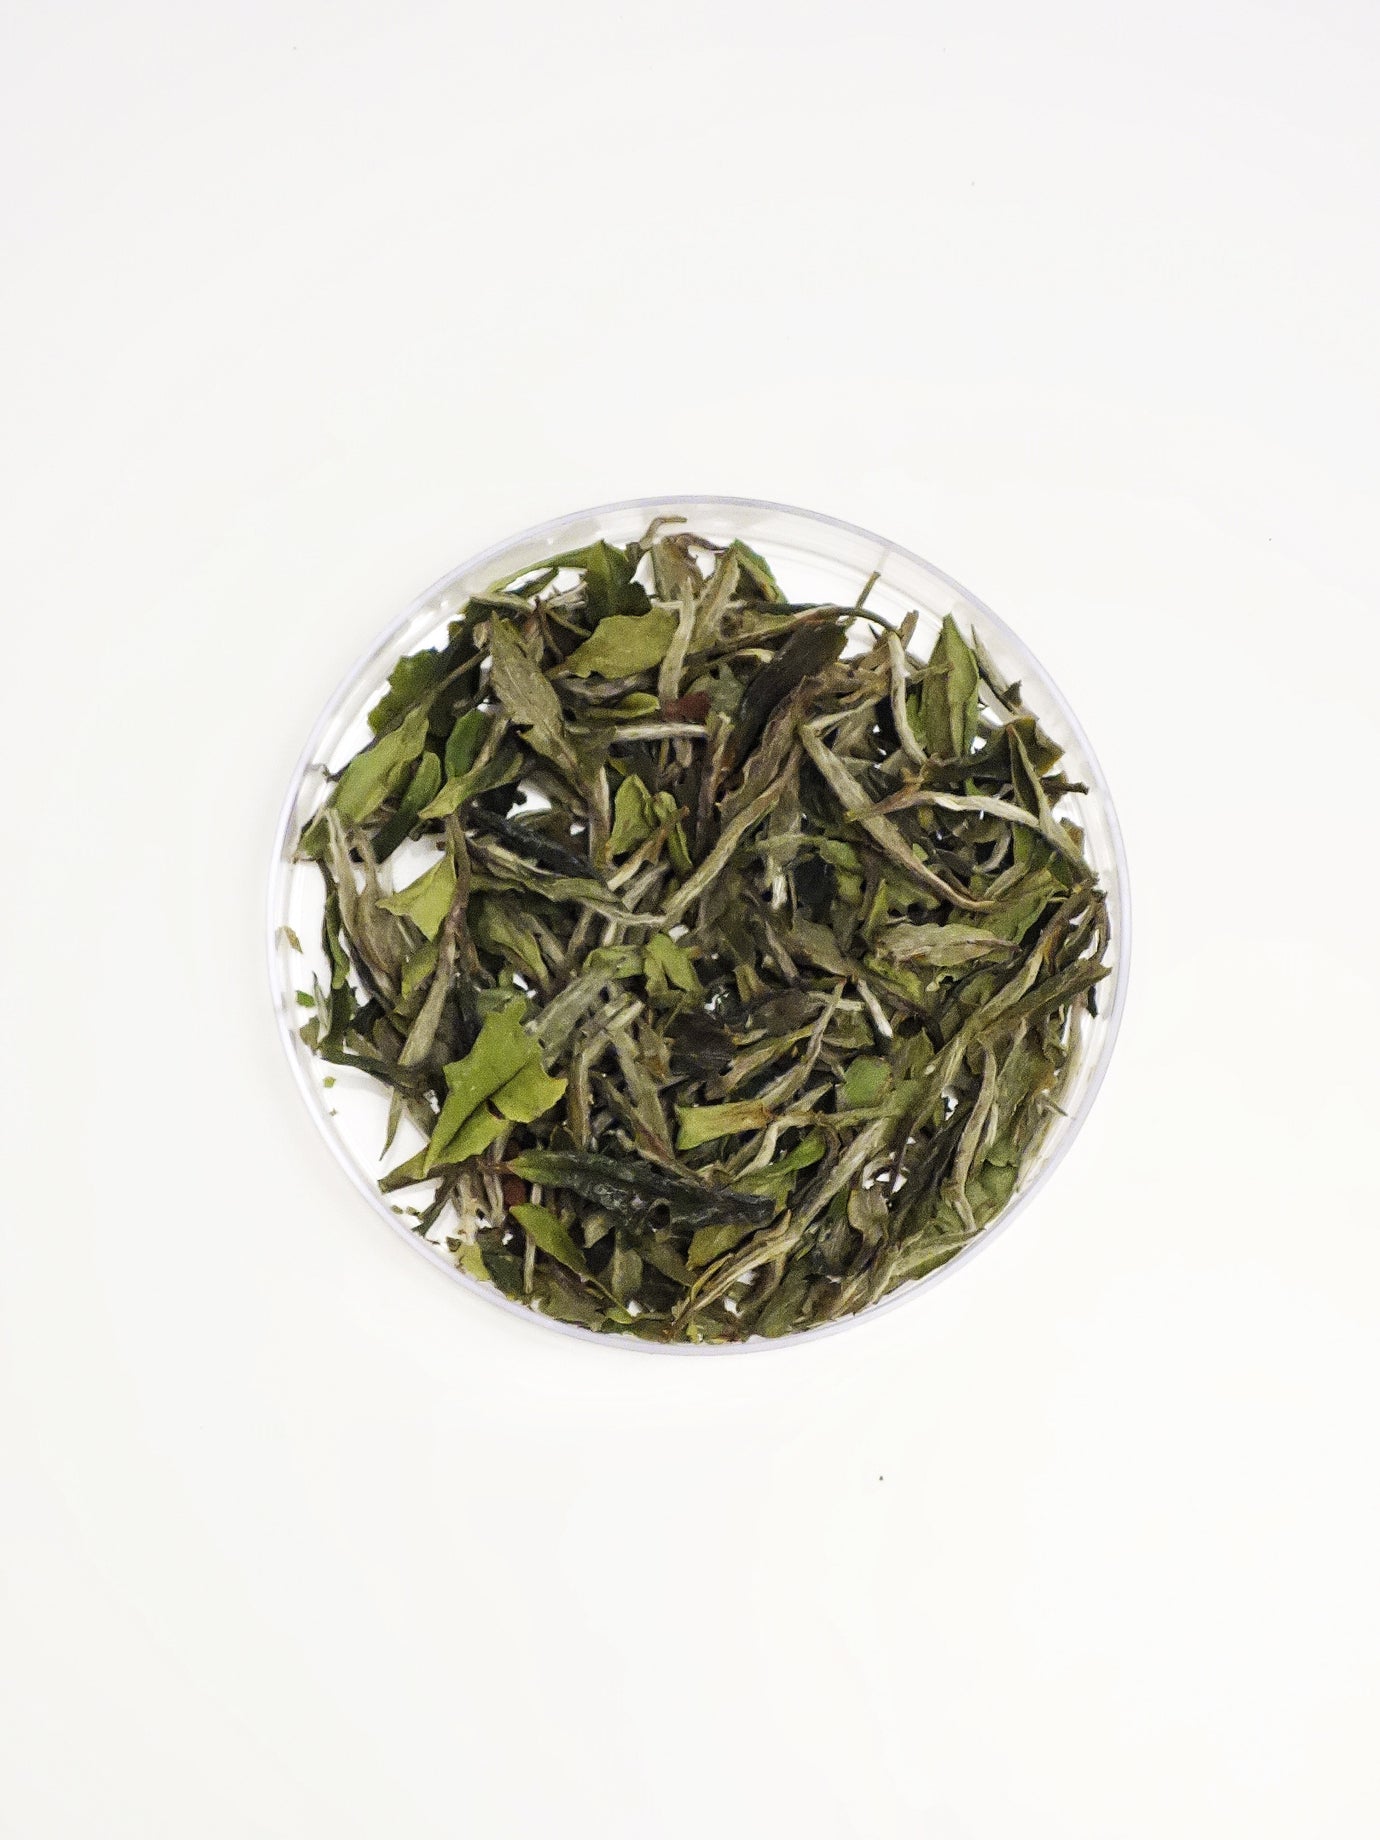 Why Do People Love Aged White Tea? How to store white tea?